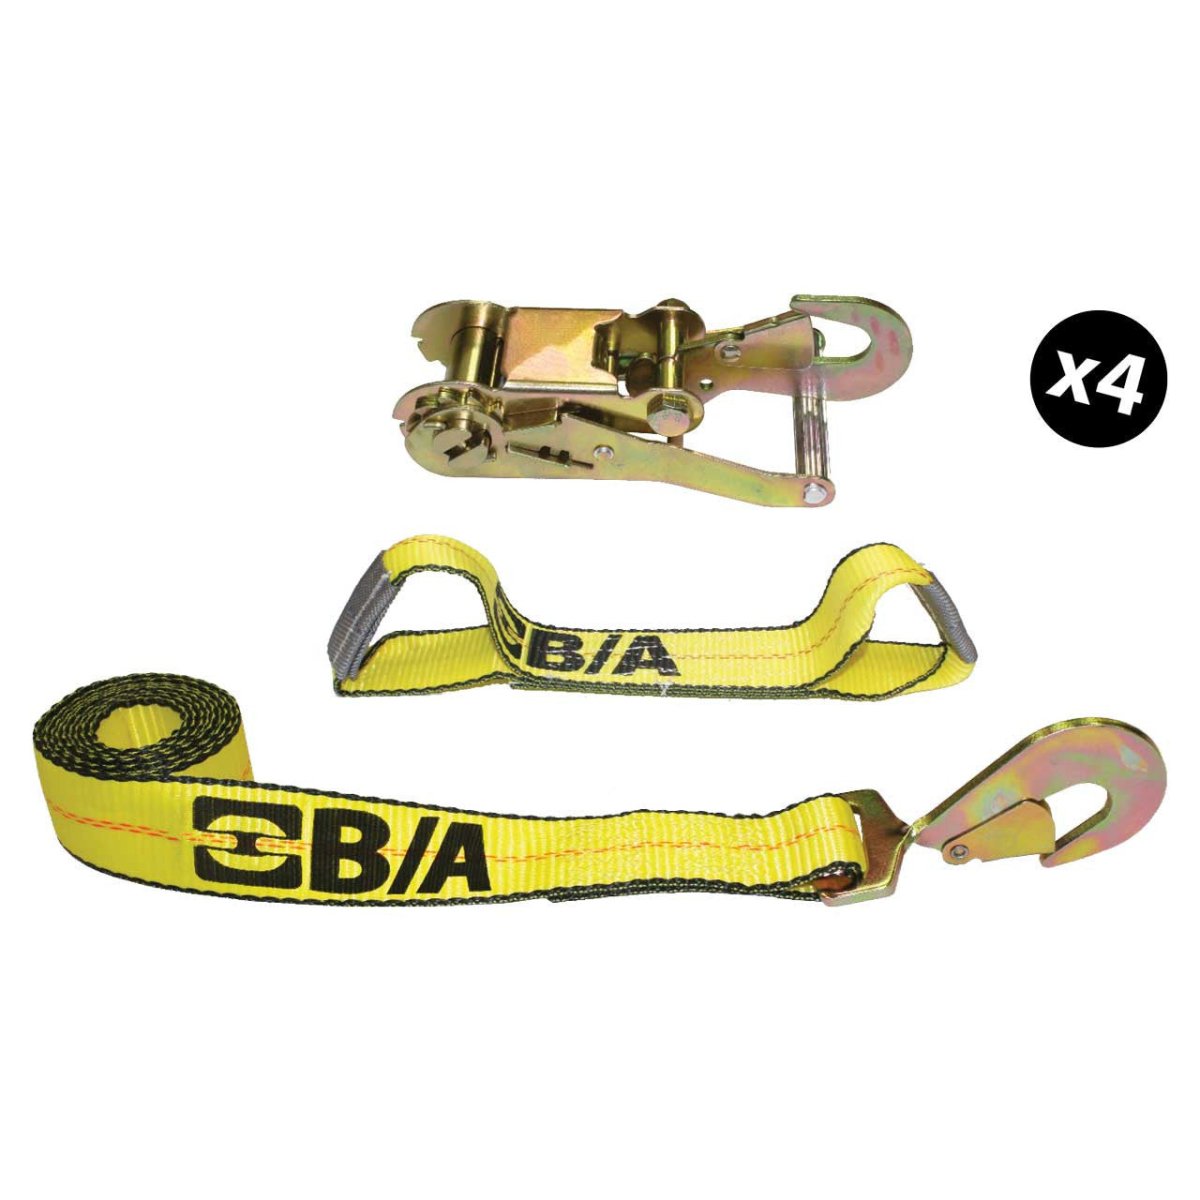 B/A Products Co. 2" Original Patented Roll Back Tie-Down System w/Snap Hook Ends - starequipmentsales